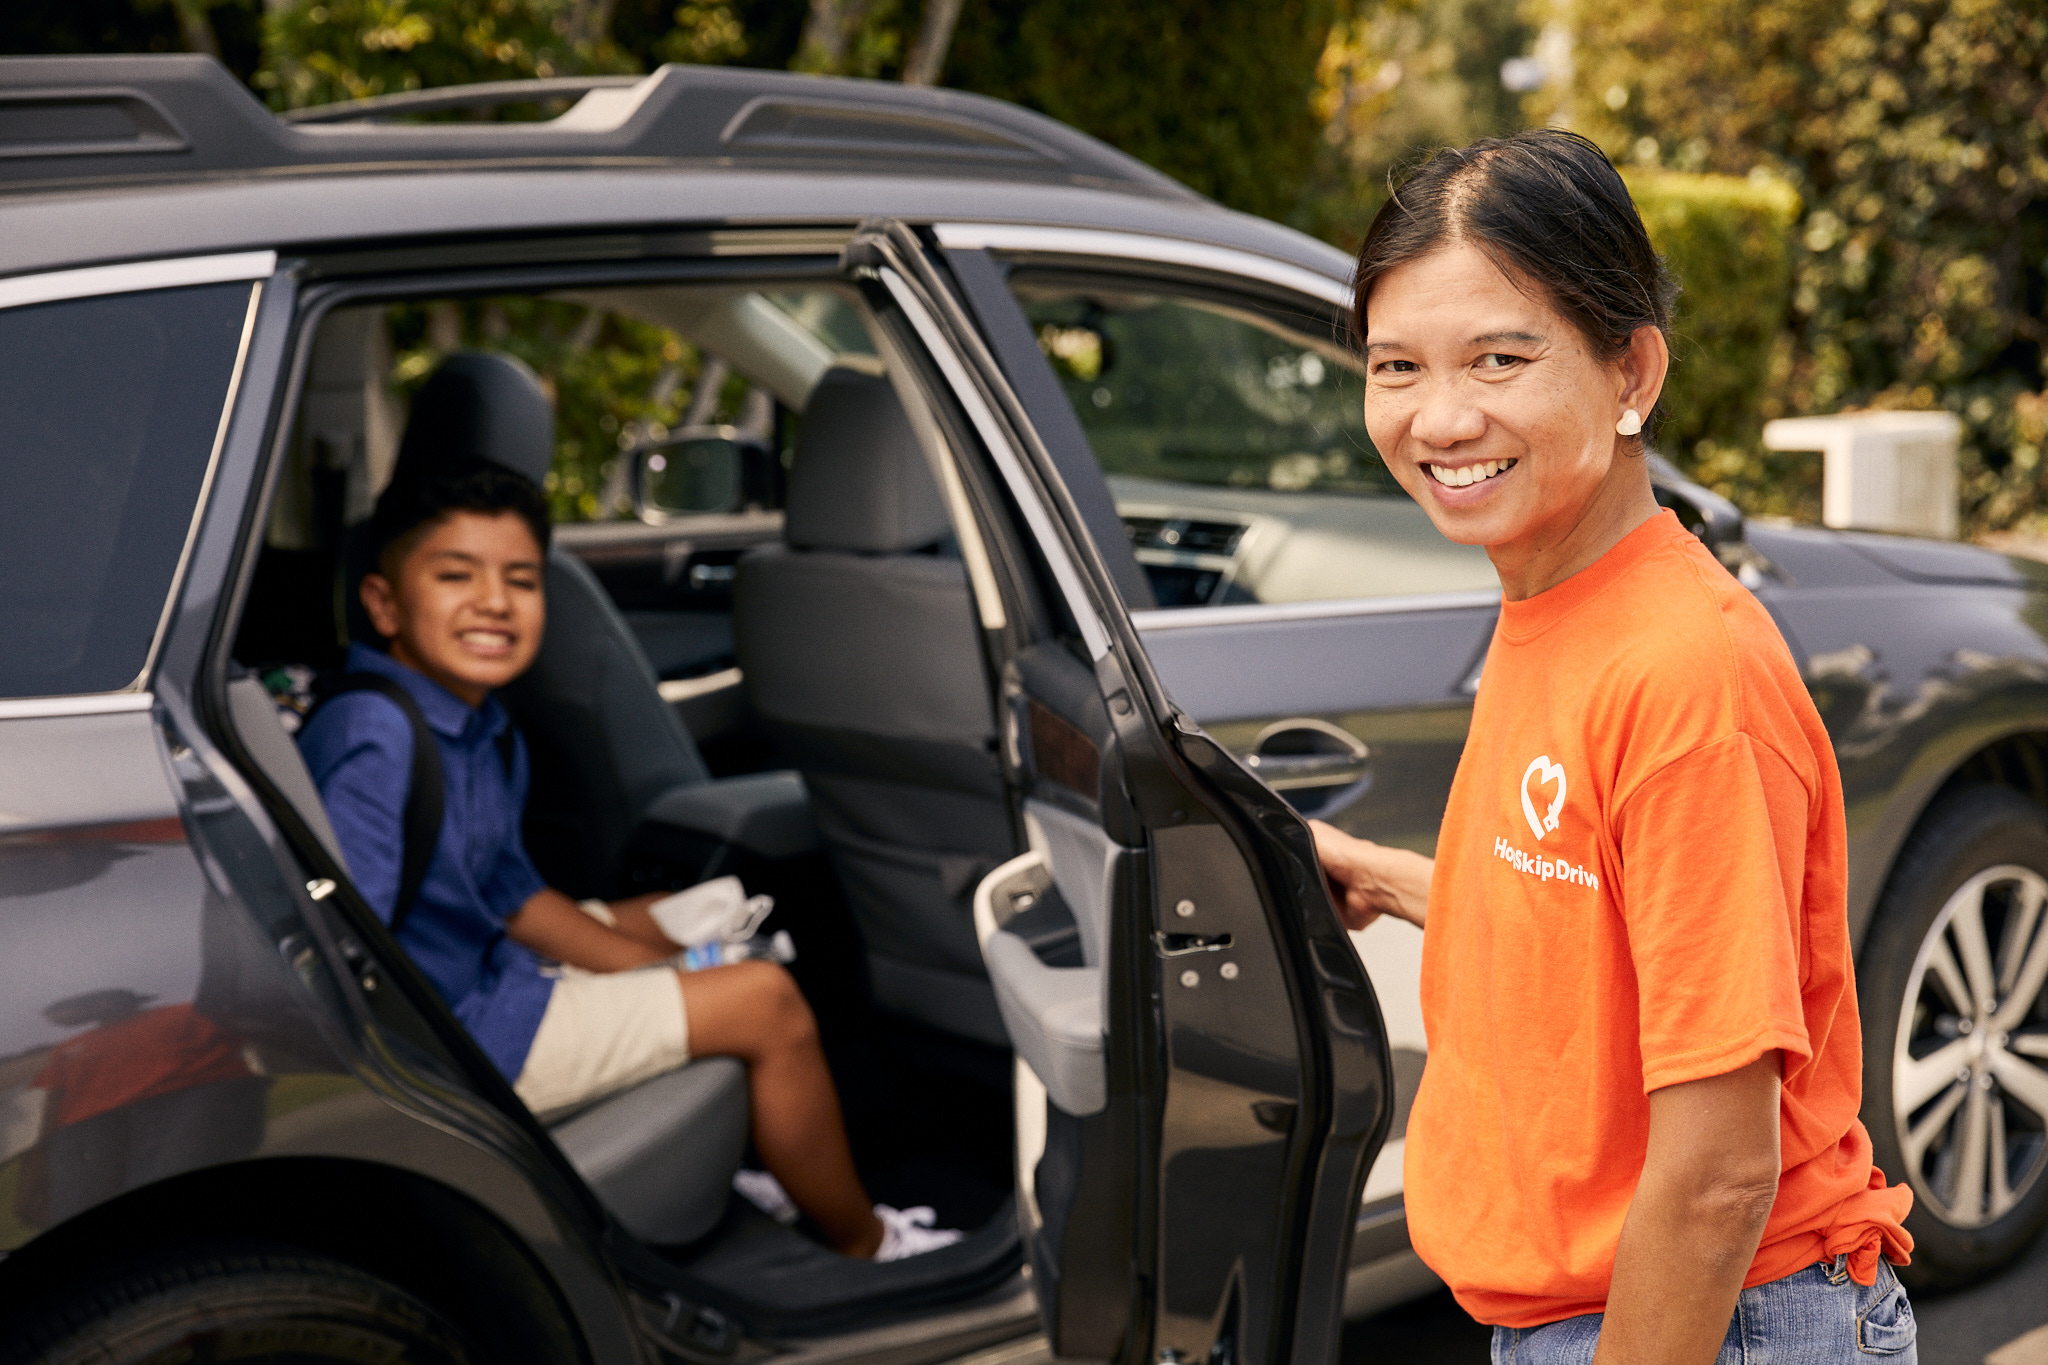 A new, flexible driver supply for school transportation